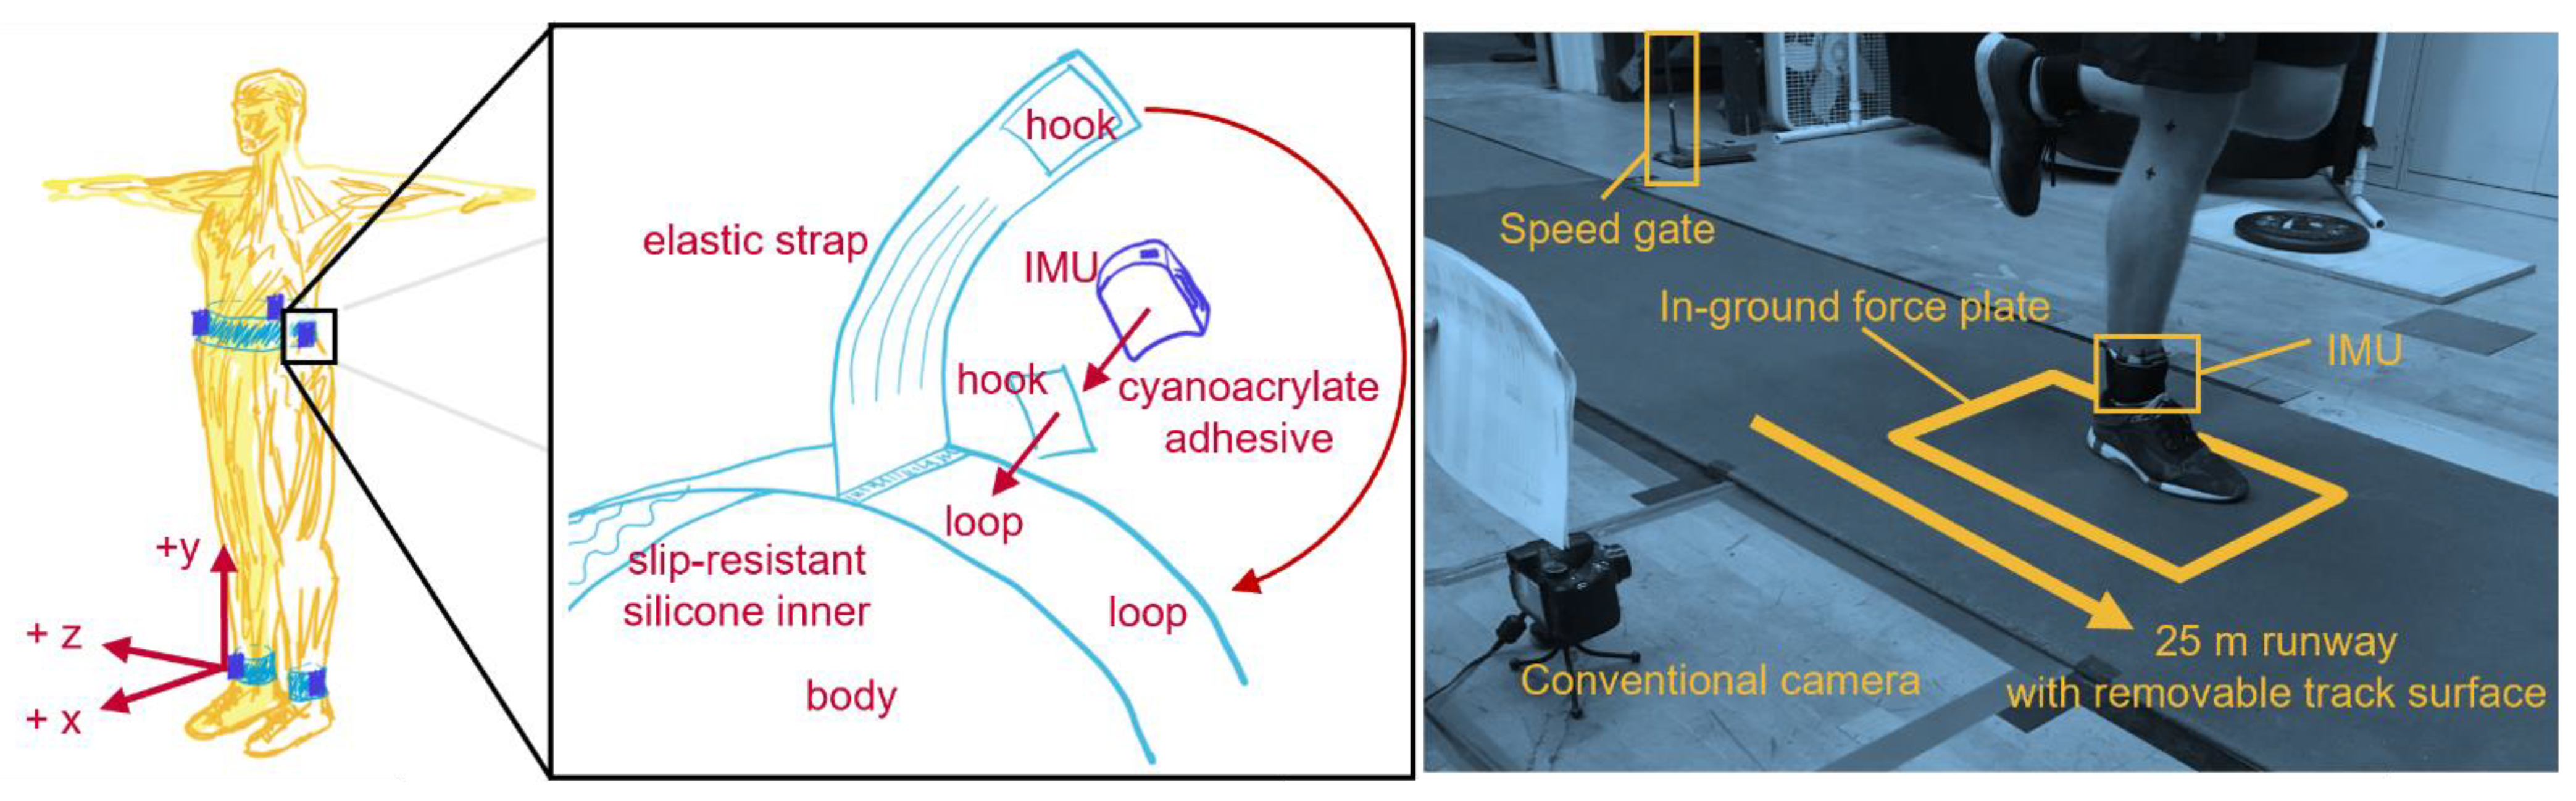 Sensors Free Full-Text Unsupervised Gait Event Identification with a Single Wearable Accelerometer and/or Gyroscope A Comparison of Methods across Running Speeds, Surfaces, and Foot Strike Patterns photo